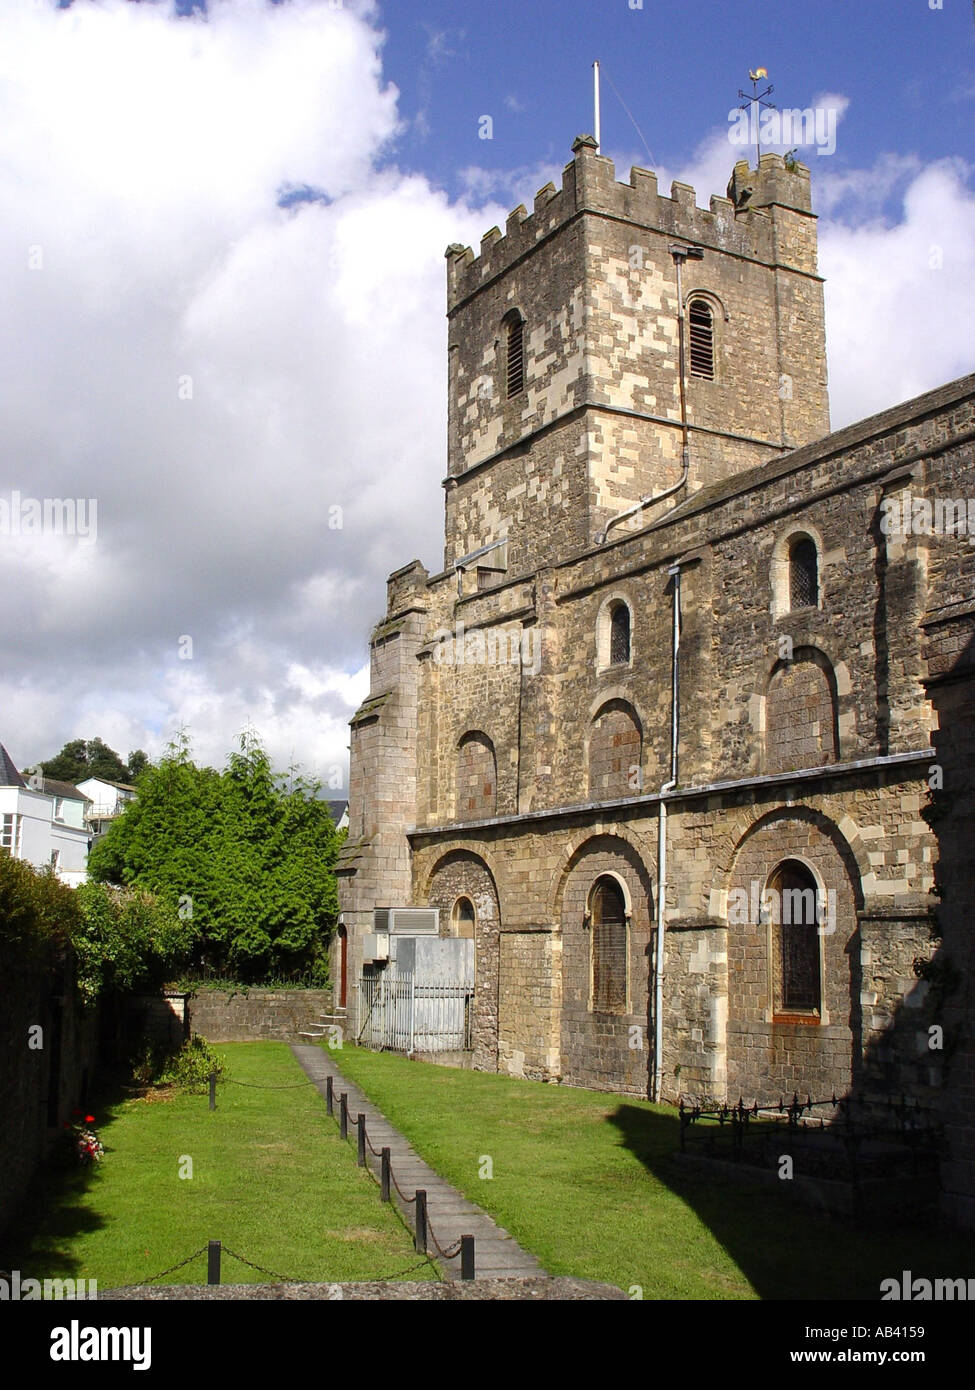 The Priory Church of St Mary on Church Road in the border town of Chepstow Monmouthshire South Wales GB UK 2003 Stock Photo